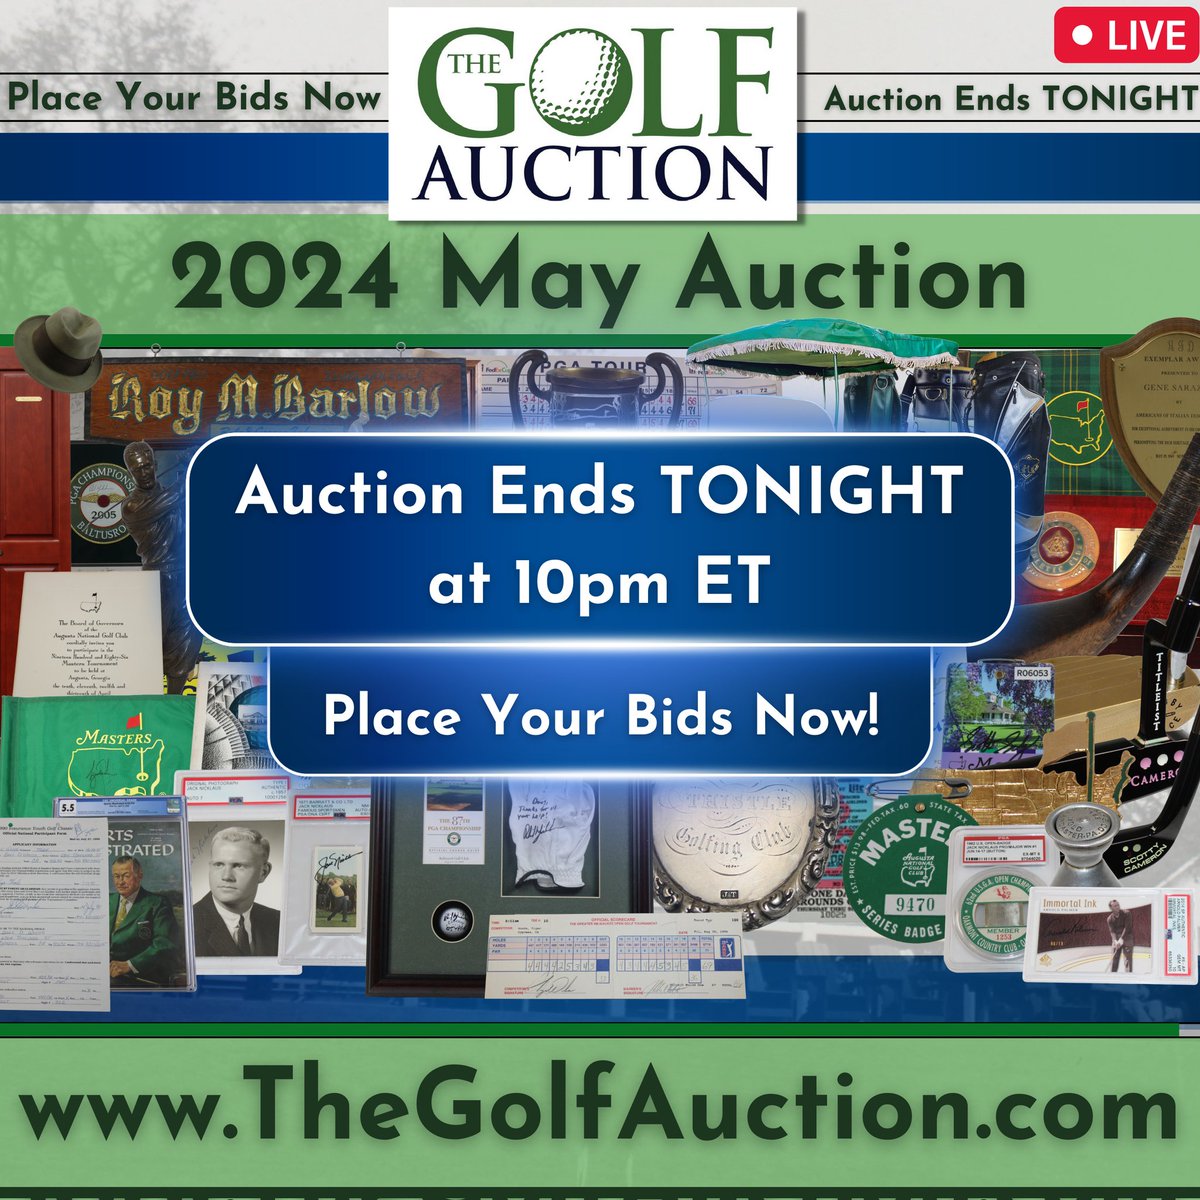 Less than one hour to get your initial bids in. 

Our 2024 May Golf Memorabilia Auction will close at 10pm ET,  snd extended bidding starts immediately at 10pm ET ⛳️🙌

thegolfauction.com/mobile/catalog…